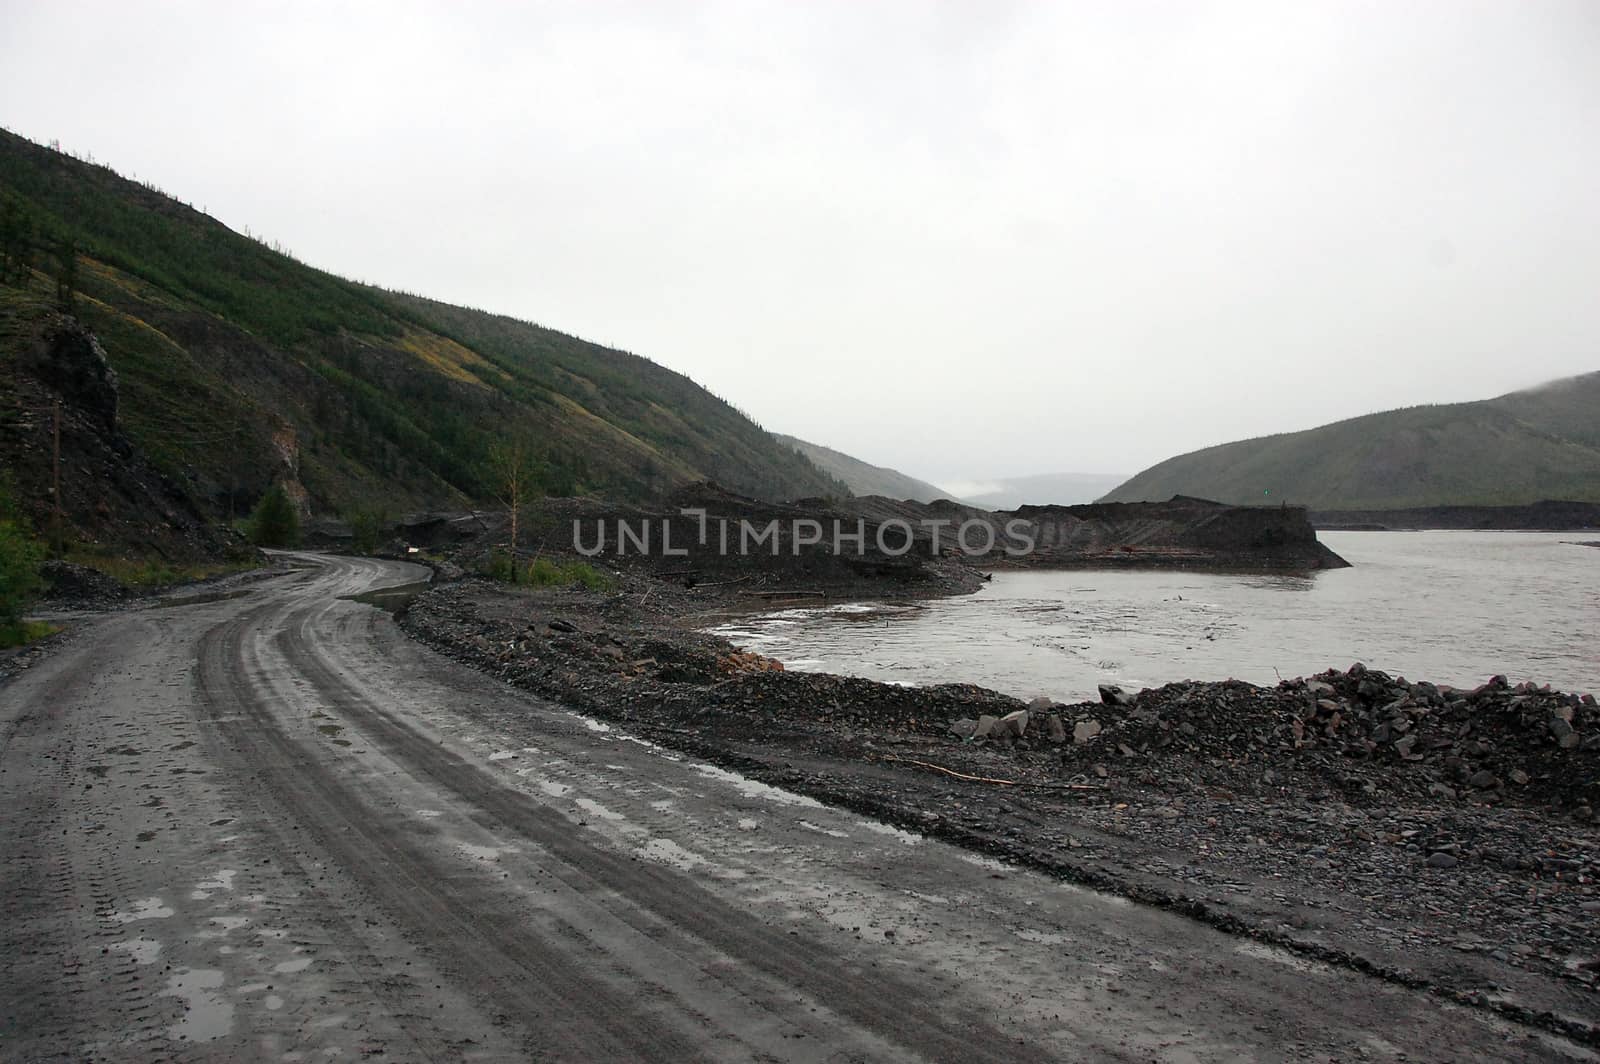 Gravel road Kolyma state highway at outback of Russia, Yakutia region